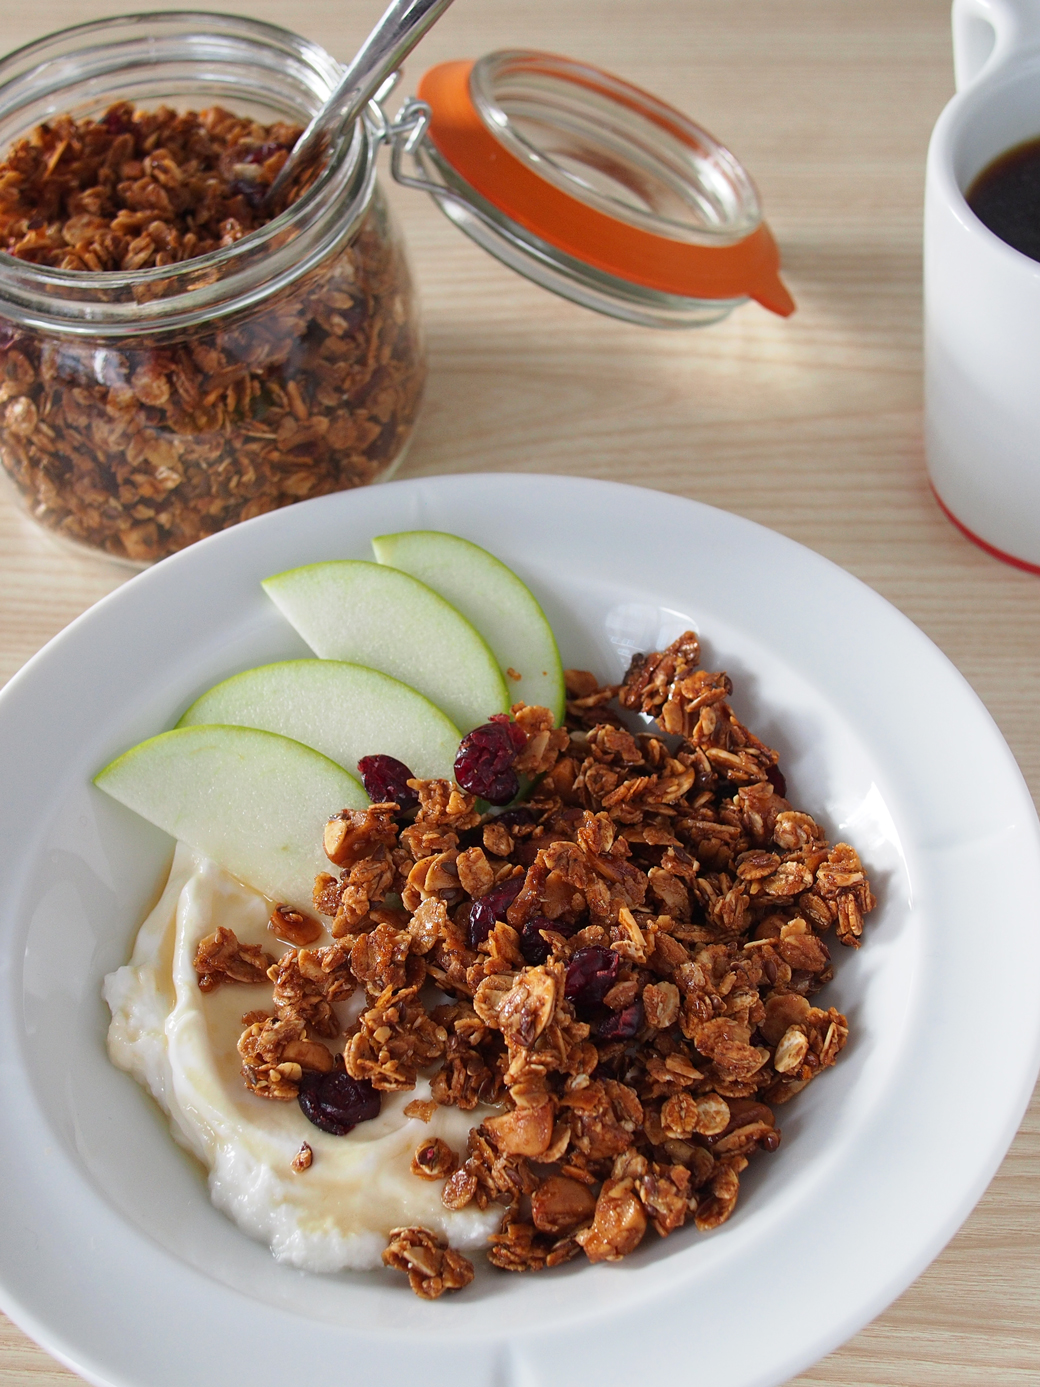 Autumn-Inspired Vegan Granola Recipe with Pumpkin Seeds and Dried Cranberries | The Worktop